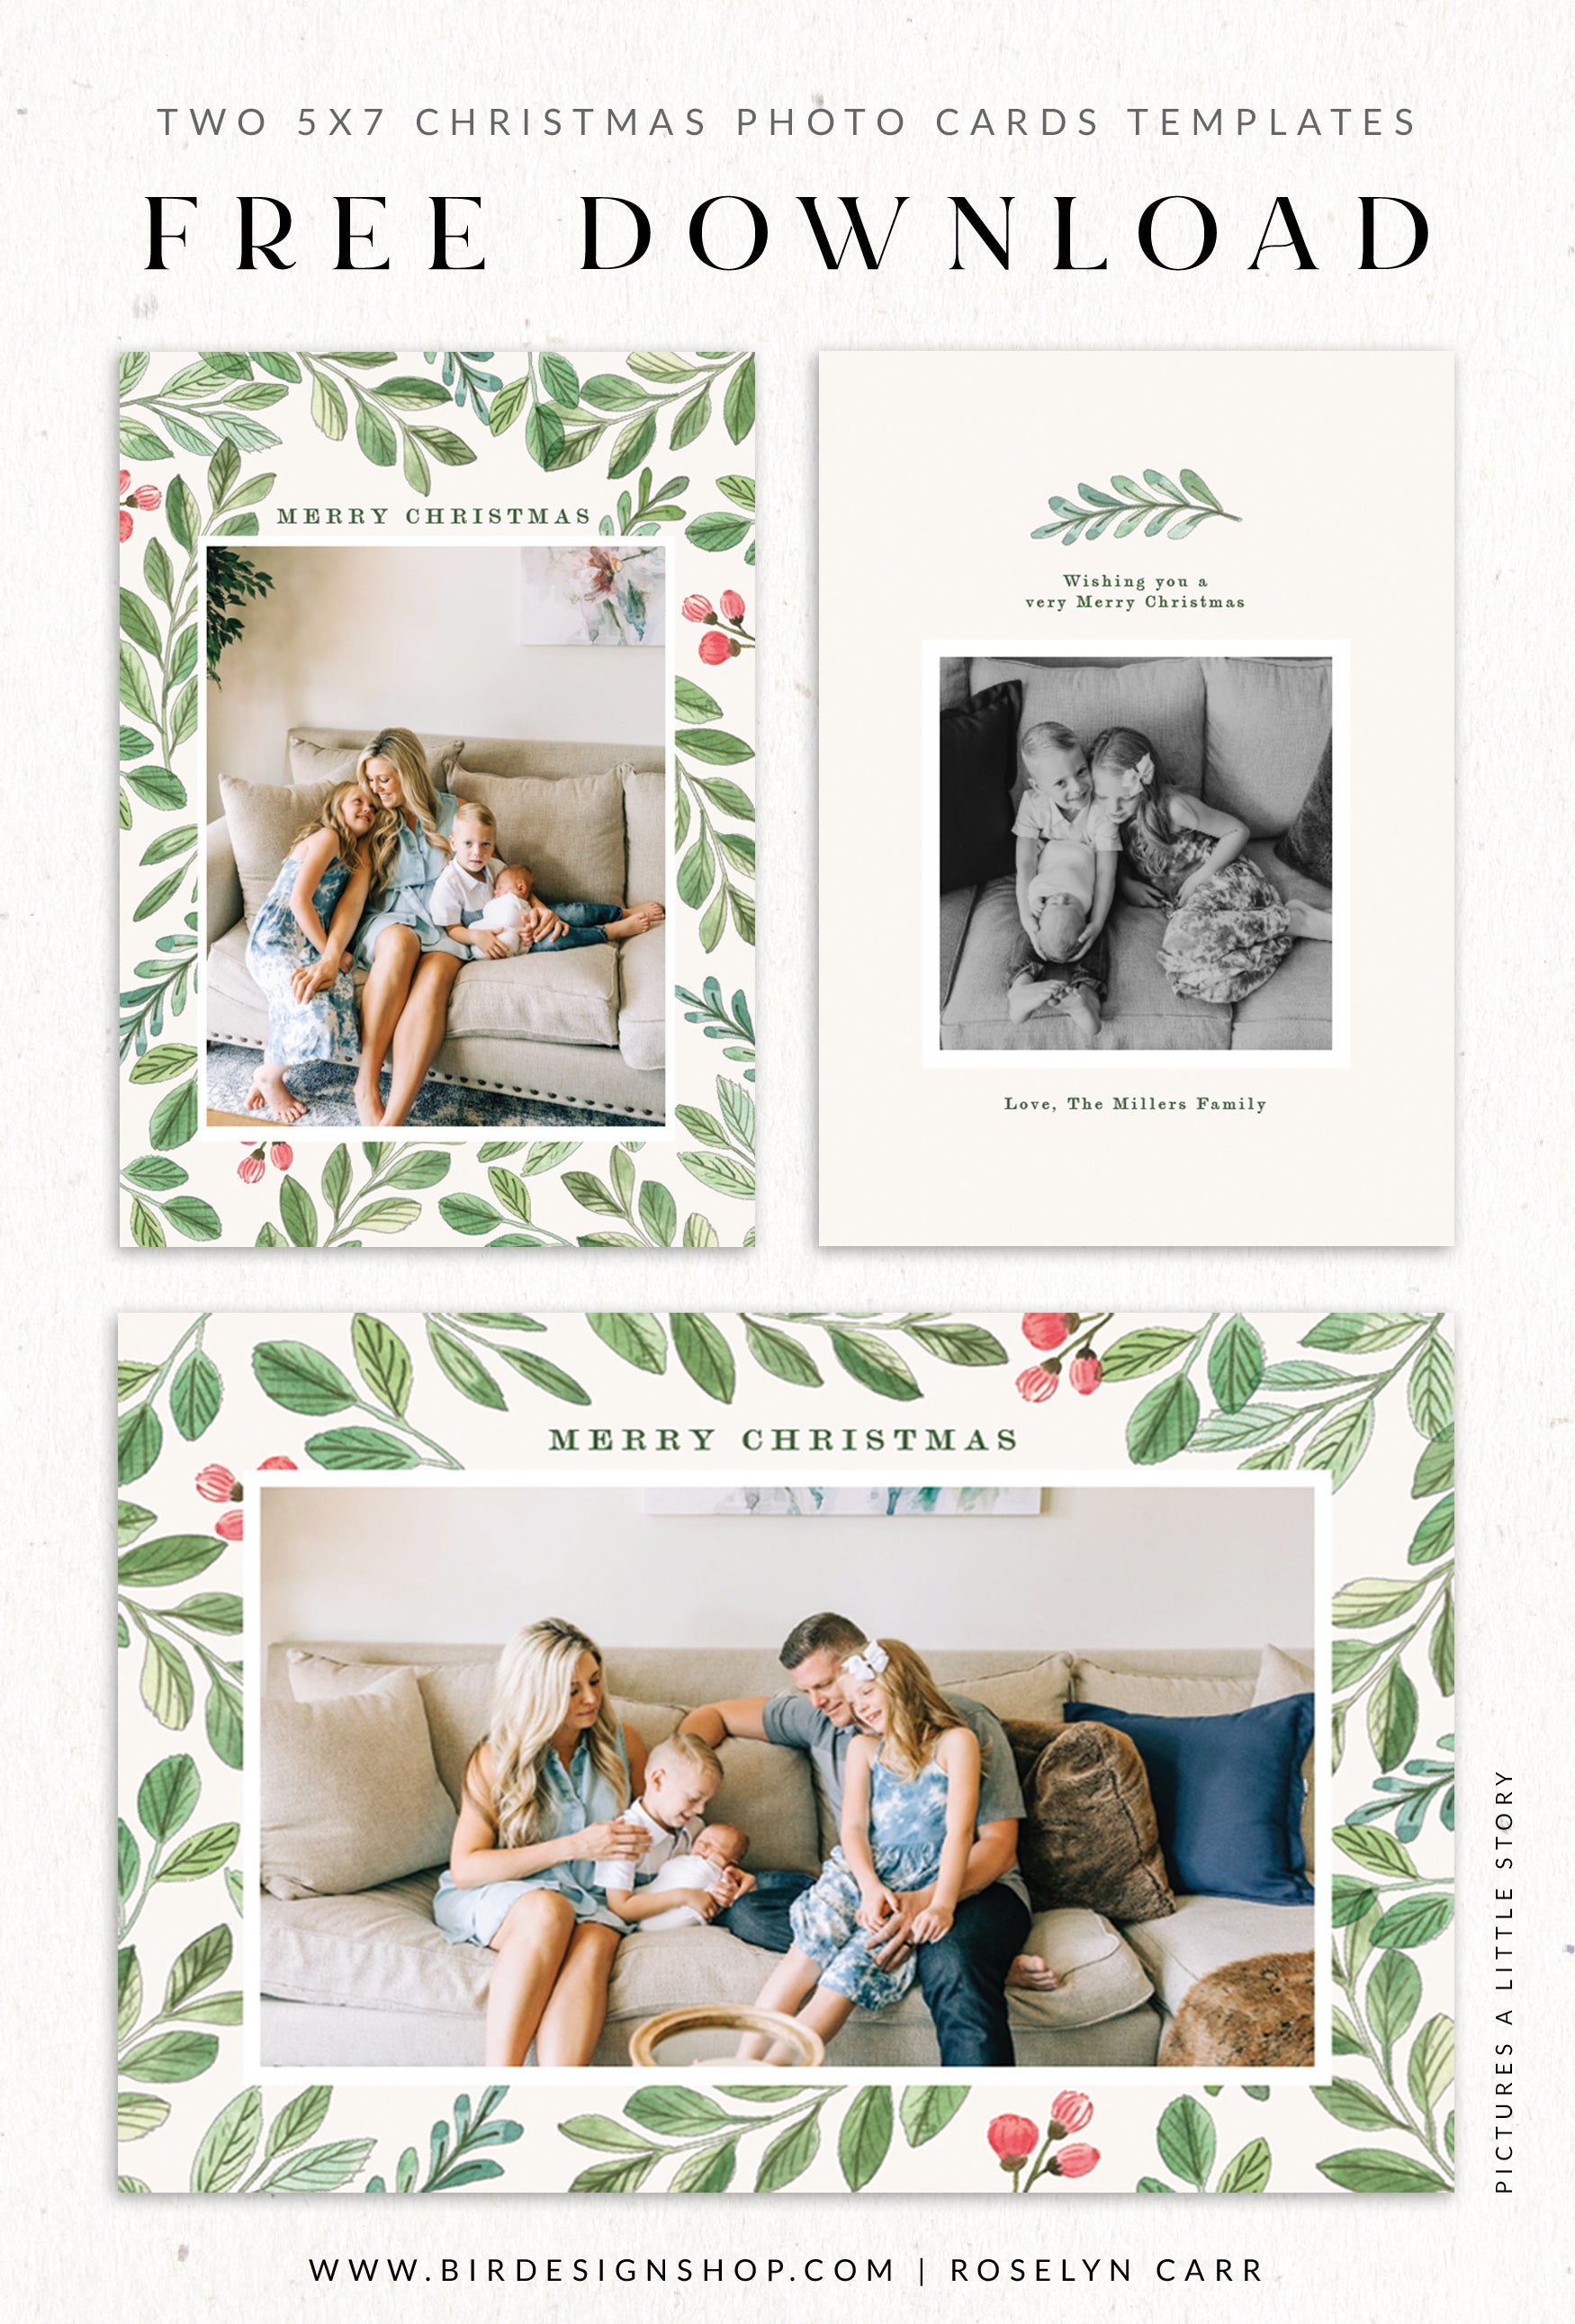 FREE Christmas Cards templates